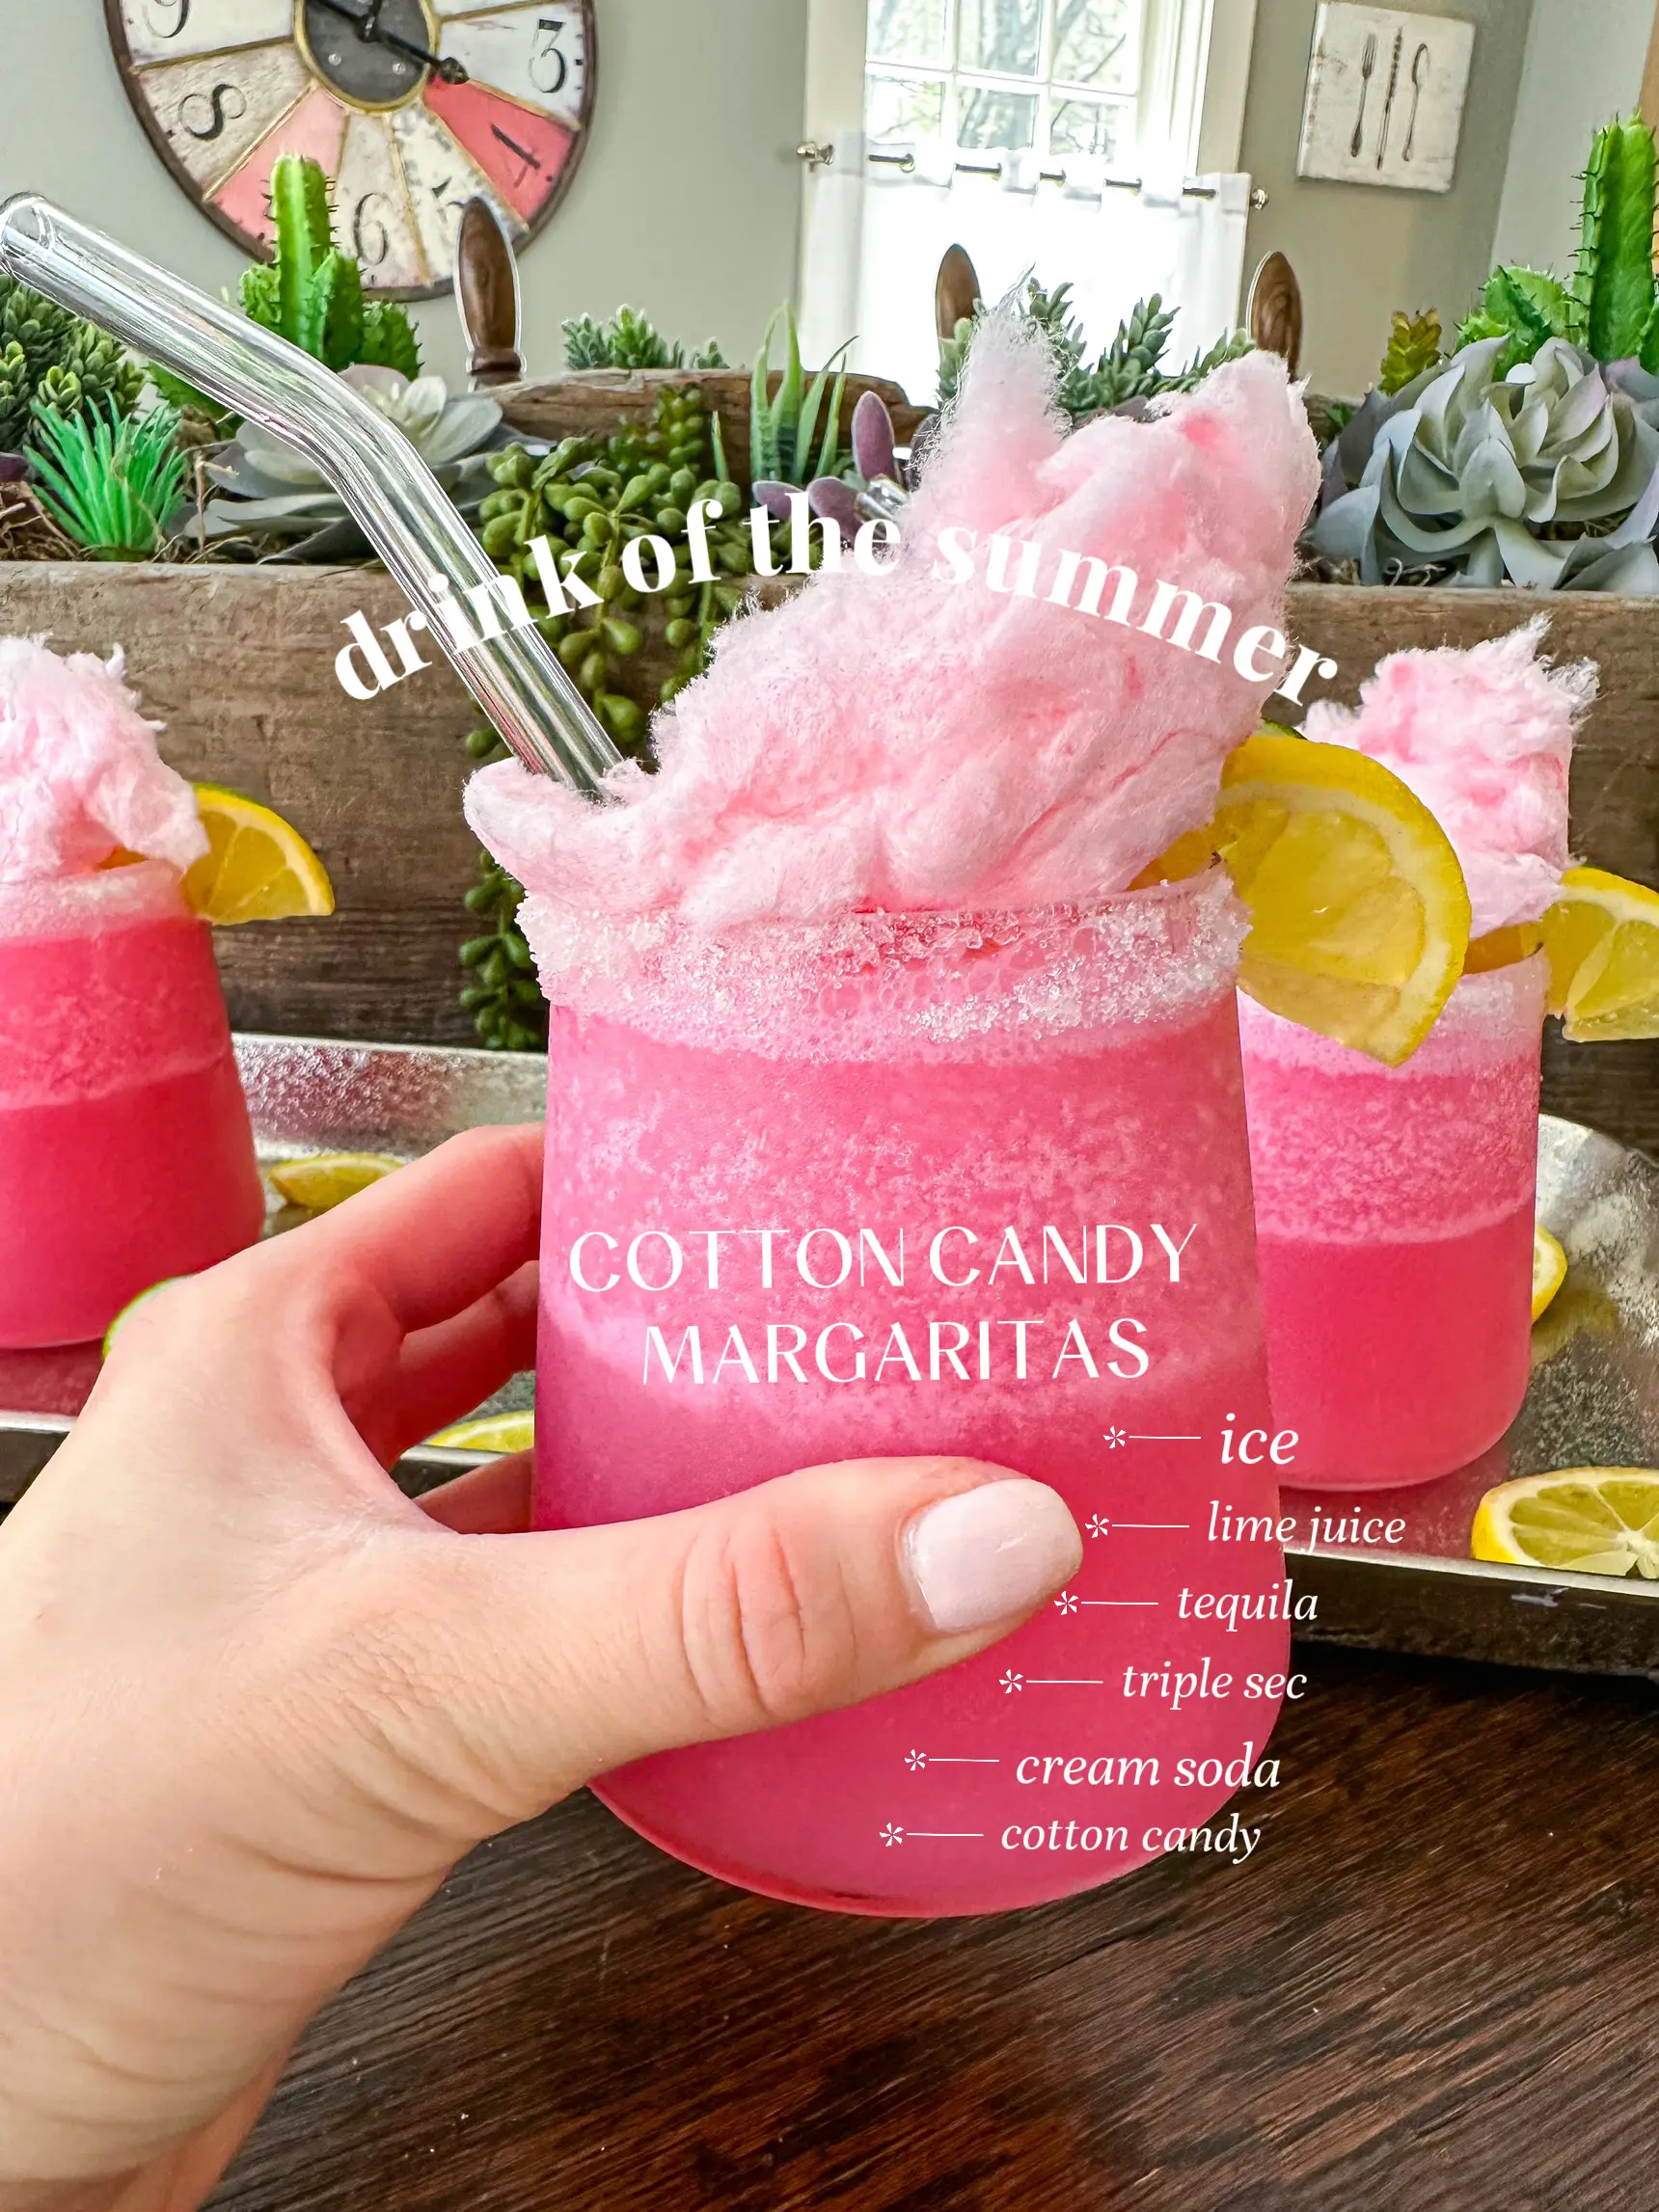  A hand holding a glass of cotton candy margaritas.